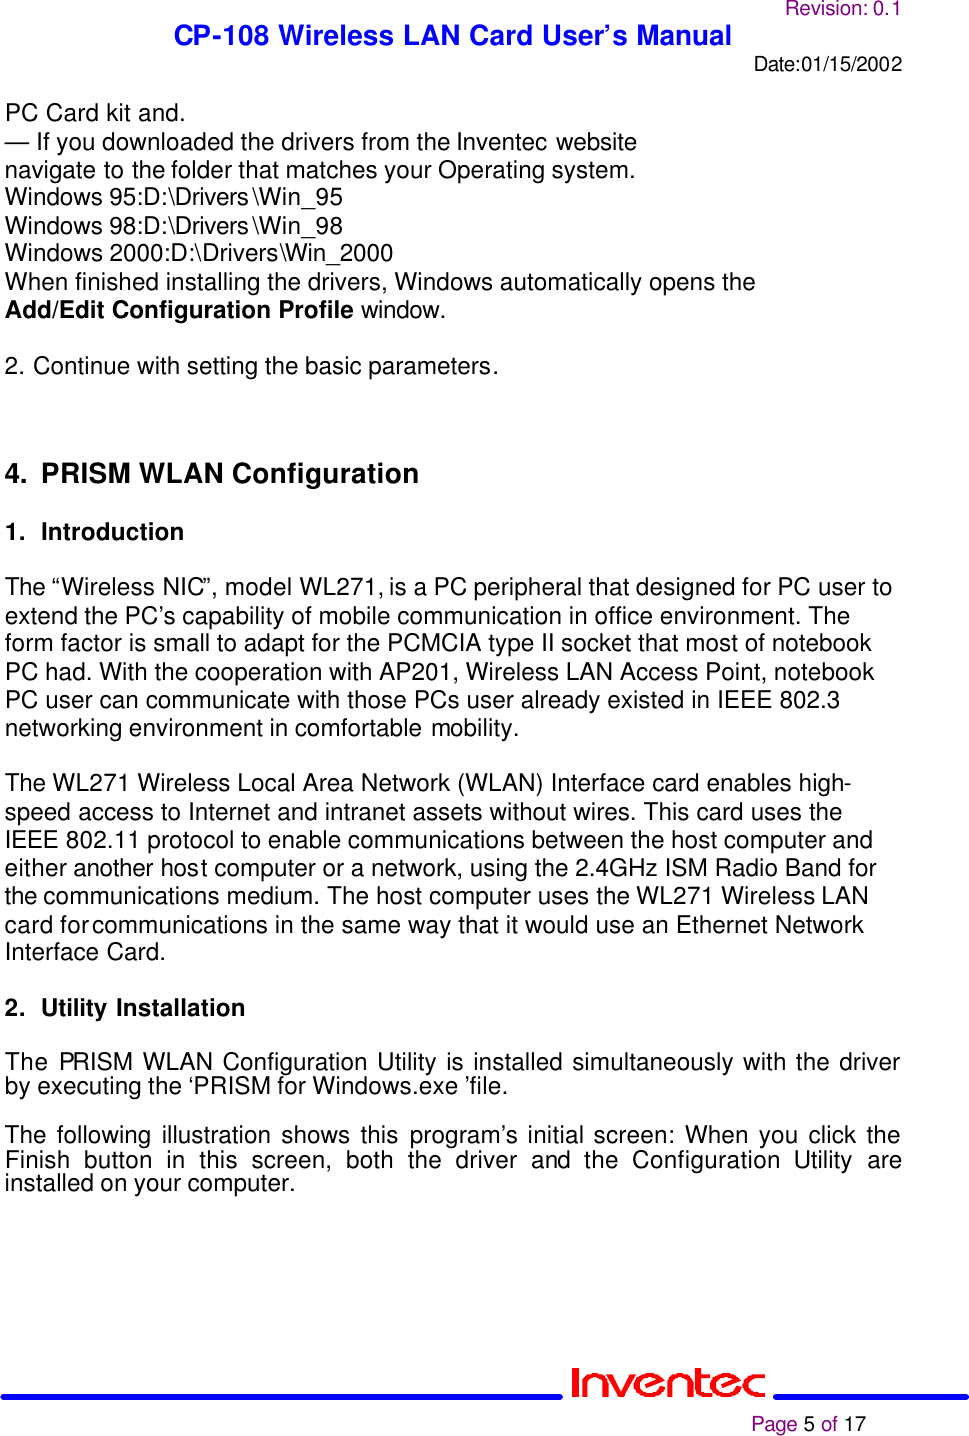 Revision: 0.1 CP-108 Wireless LAN Card User’s Manual Date:01/15/2002                                                                                                                                                             Page 5 of 17  PC Card kit and. — If you downloaded the drivers from the Inventec website navigate to the folder that matches your Operating system. Windows 95:D:\Drivers\Win_95 Windows 98:D:\Drivers\Win_98 Windows 2000:D:\Drivers\Win_2000 When finished installing the drivers, Windows automatically opens the Add/Edit Configuration Profile window.  2. Continue with setting the basic parameters.      4. PRISM WLAN Configuration  1. Introduction  The “Wireless NIC”, model WL271, is a PC peripheral that designed for PC user to extend the PC’s capability of mobile communication in office environment. The form factor is small to adapt for the PCMCIA type II socket that most of notebook PC had. With the cooperation with AP201, Wireless LAN Access Point, notebook PC user can communicate with those PCs user already existed in IEEE 802.3 networking environment in comfortable mobility.   The WL271 Wireless Local Area Network (WLAN) Interface card enables high-speed access to Internet and intranet assets without wires. This card uses the IEEE 802.11 protocol to enable communications between the host computer and either another host computer or a network, using the 2.4GHz ISM Radio Band for the communications medium. The host computer uses the WL271 Wireless LAN card for communications in the same way that it would use an Ethernet Network Interface Card.  2. Utility Installation  The PRISM WLAN Configuration Utility is installed simultaneously with the driver by executing the ‘PRISM for Windows.exe ’file.   The following illustration shows this program’s initial screen: When you click the Finish button in this screen, both the driver and the Configuration Utility are installed on your computer.   